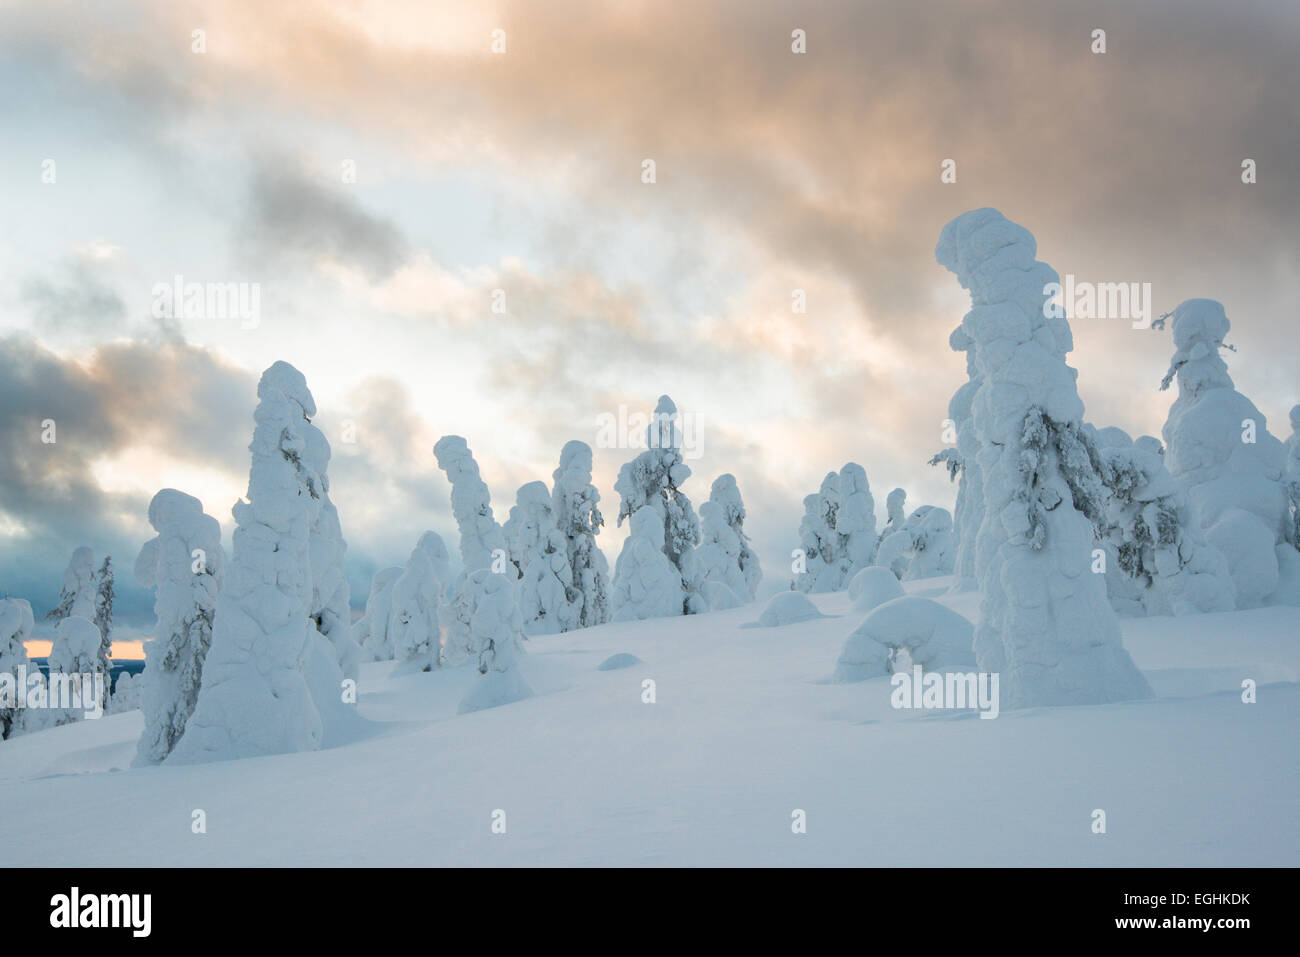 Snow-covered spruces, fjell in winter, Riisitunturi National Park, Posio, Lapland, Finland Stock Photo